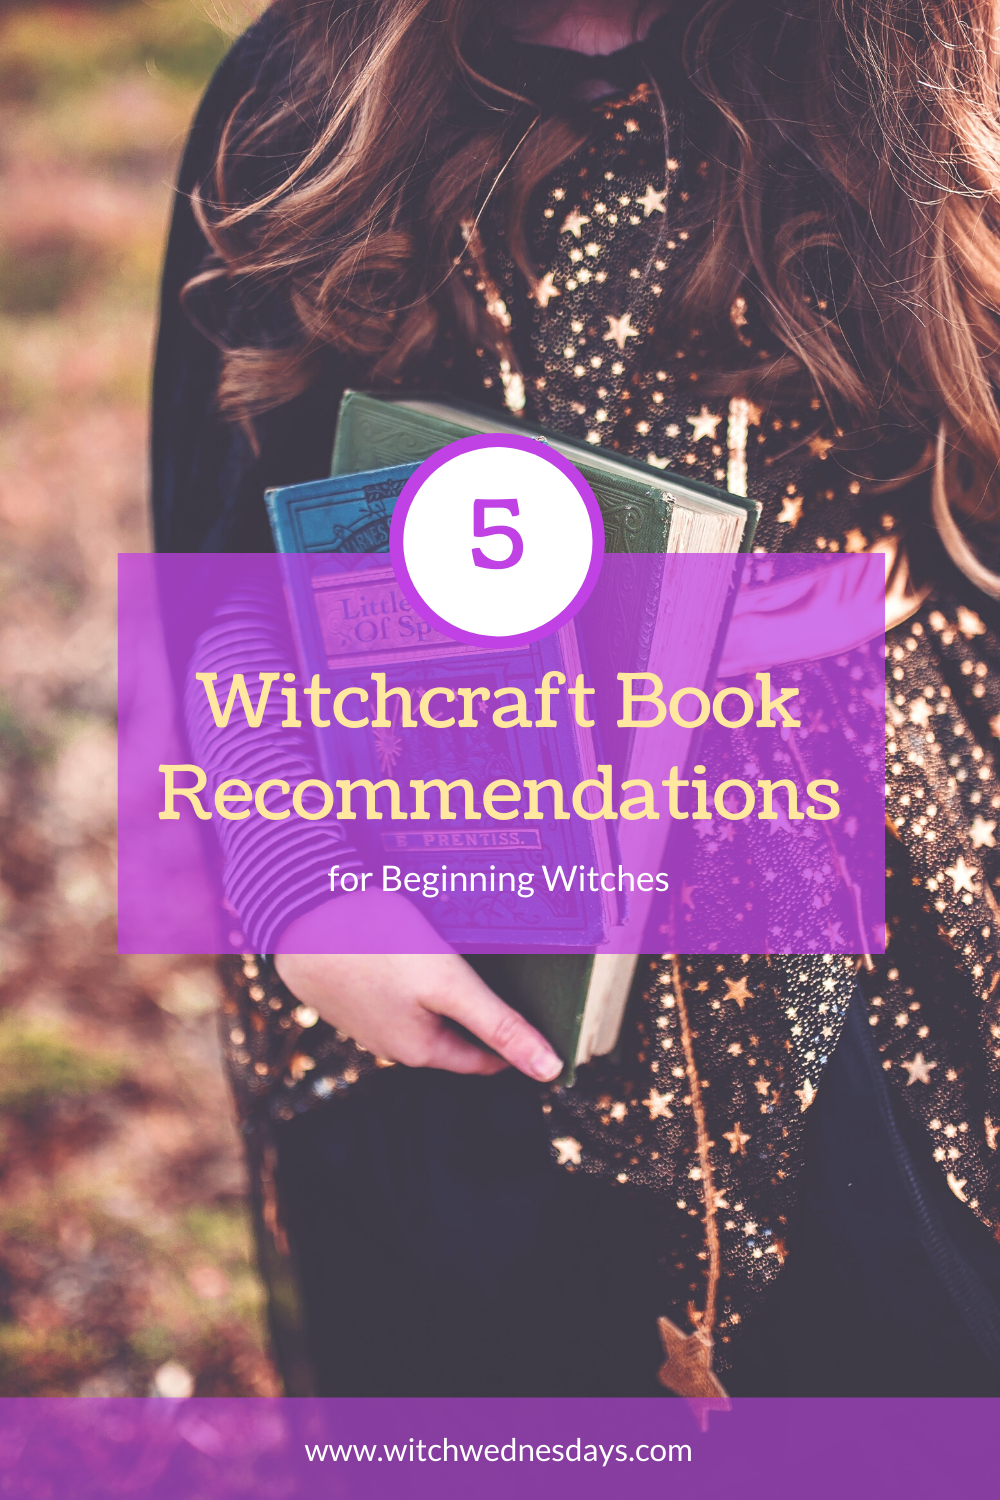 5 Witchcraft Book Recommendations for Beginner Witches